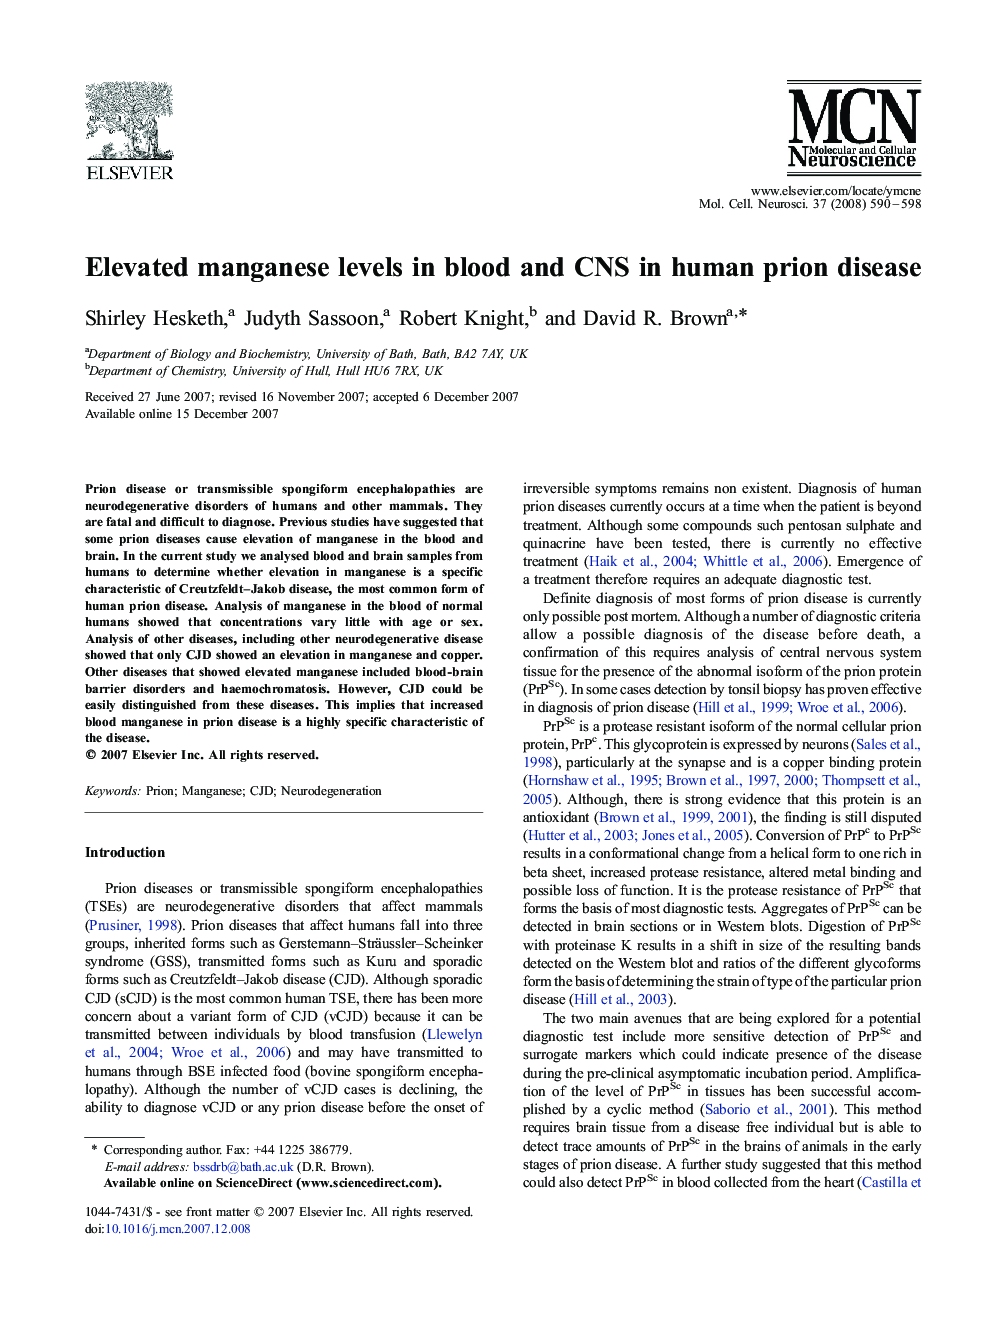 Elevated manganese levels in blood and CNS in human prion disease